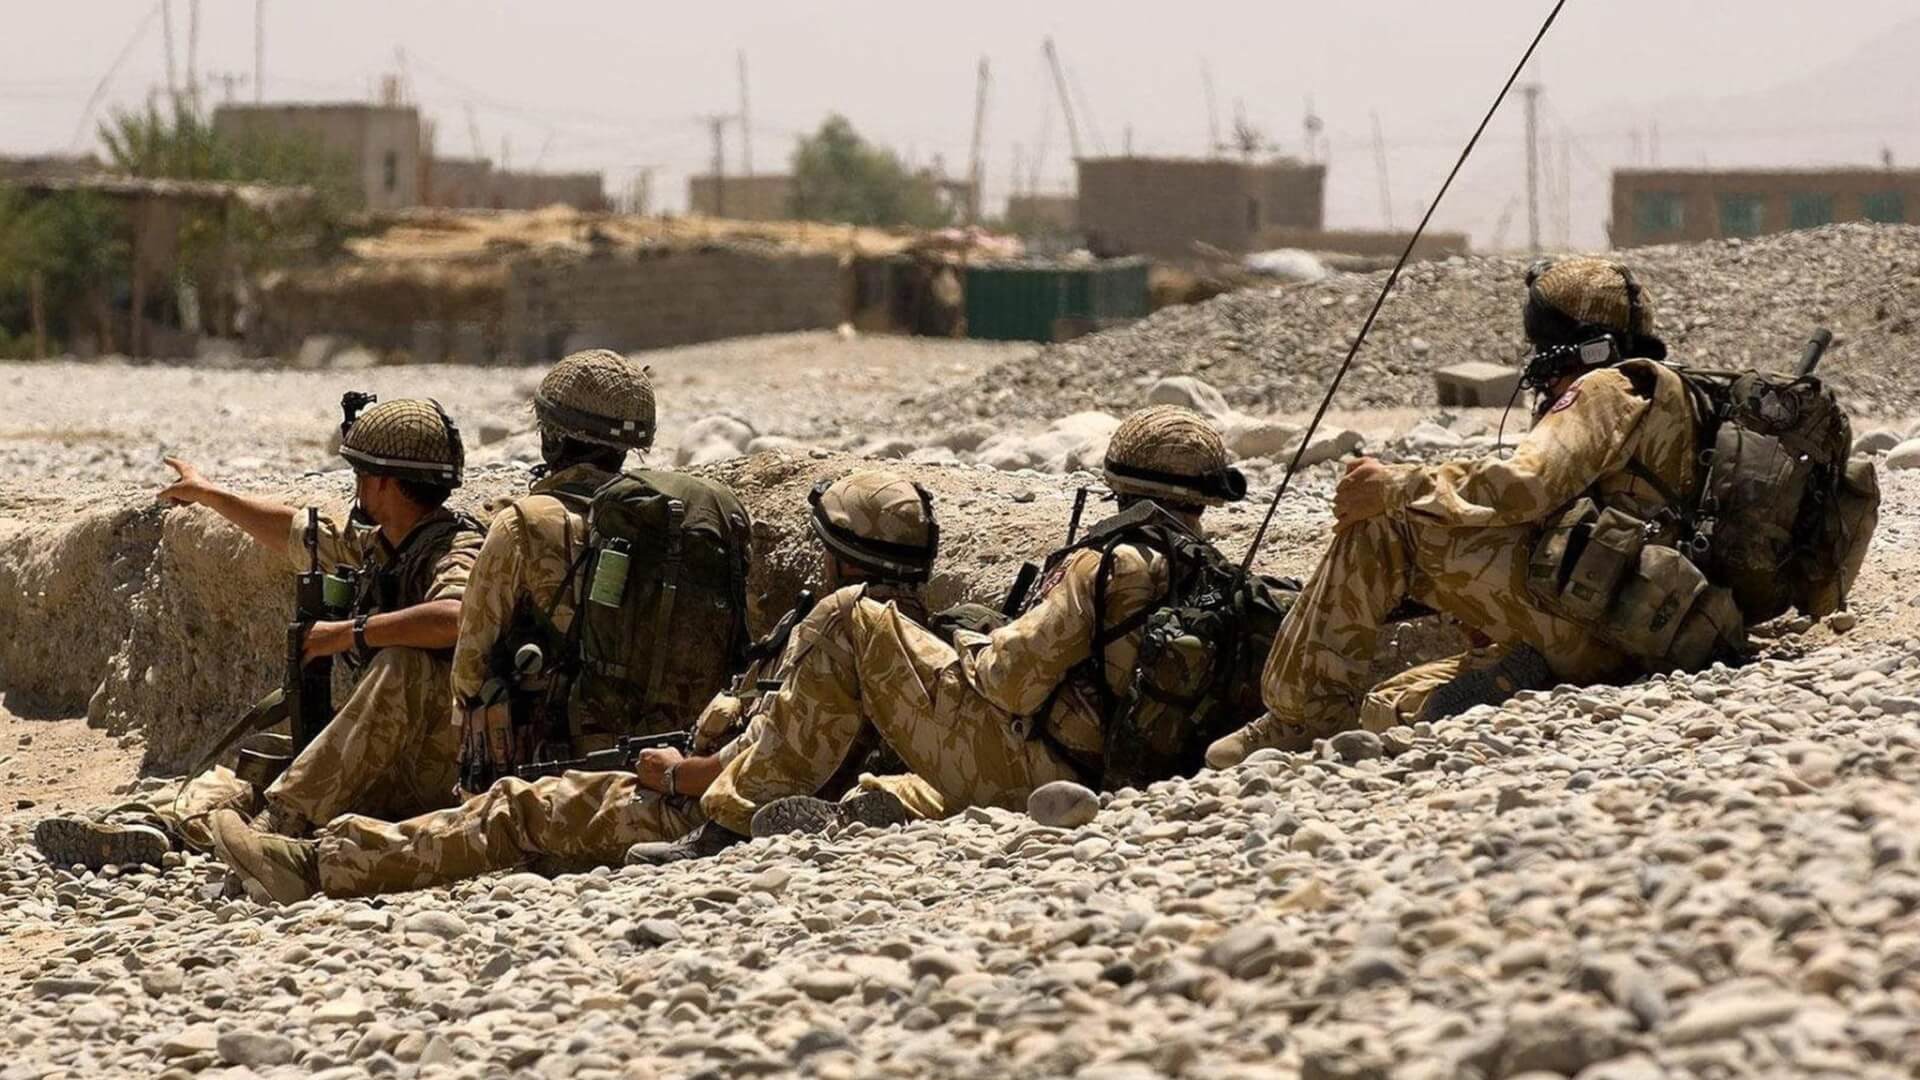 British Army Killed At Least 64 Children in Afghanistan From 2006-2014